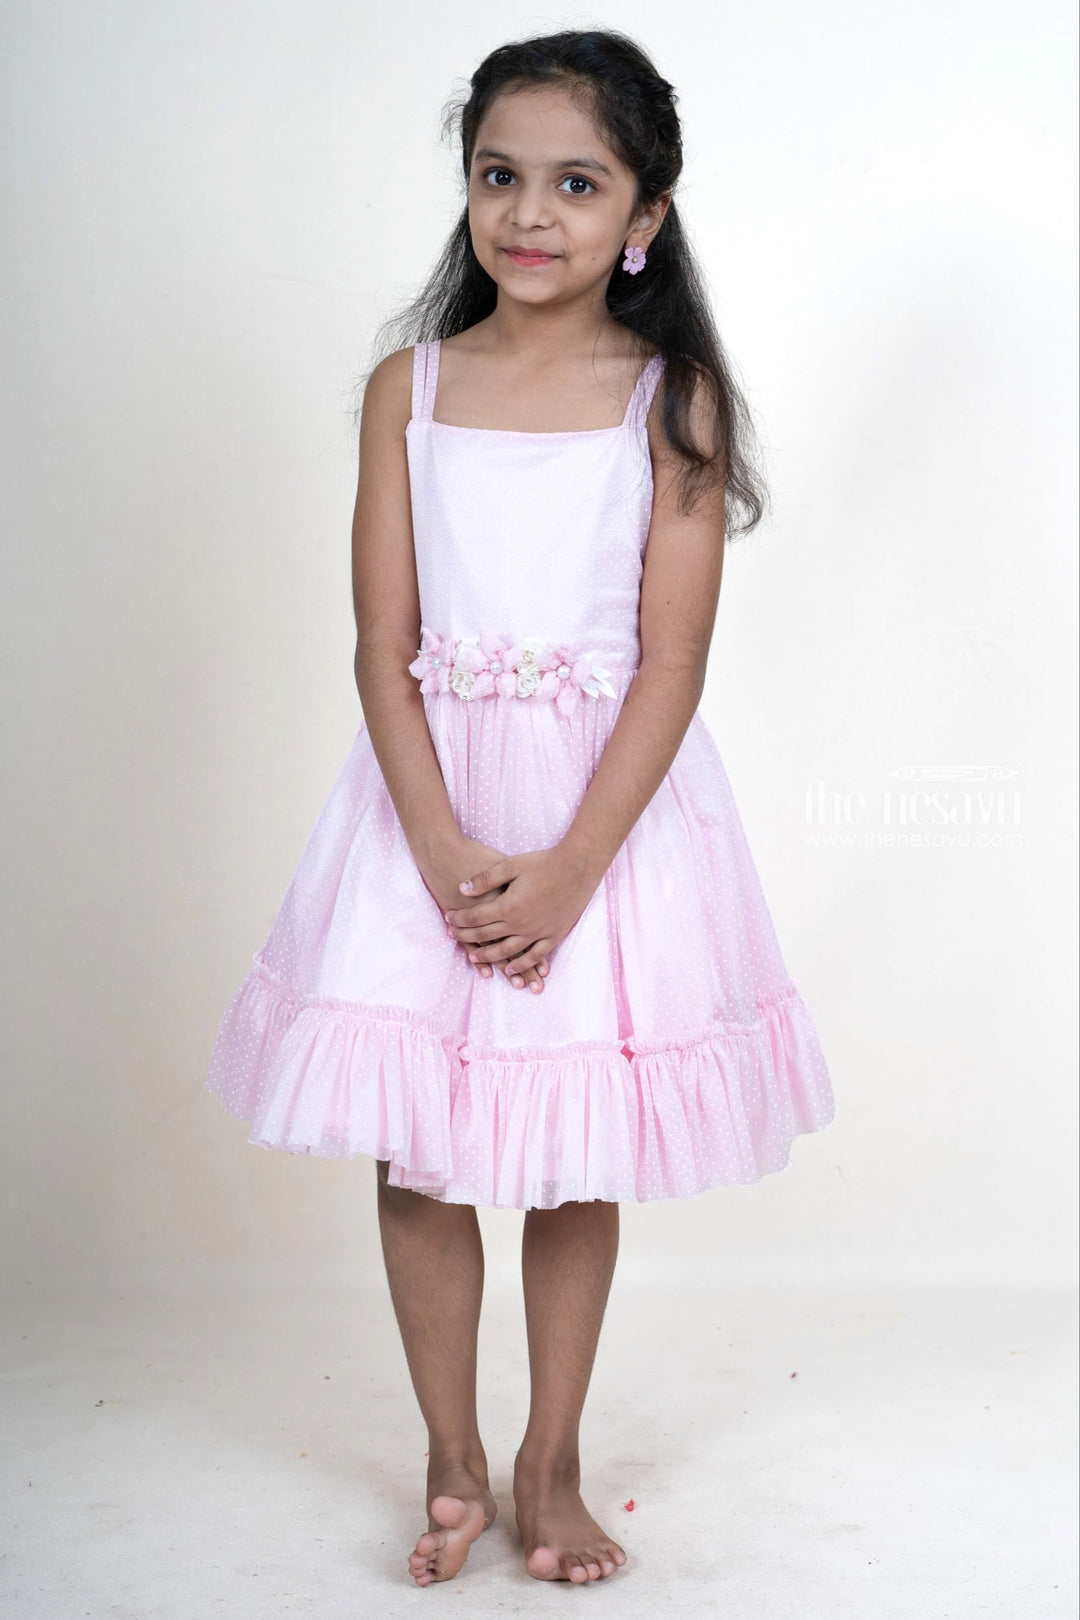 The Nesavu Girls Fancy Party Frock pink self patterned sleeveless party gown with floral embellishments for girls Nesavu 16 (1Y) / Pink PF82A-16